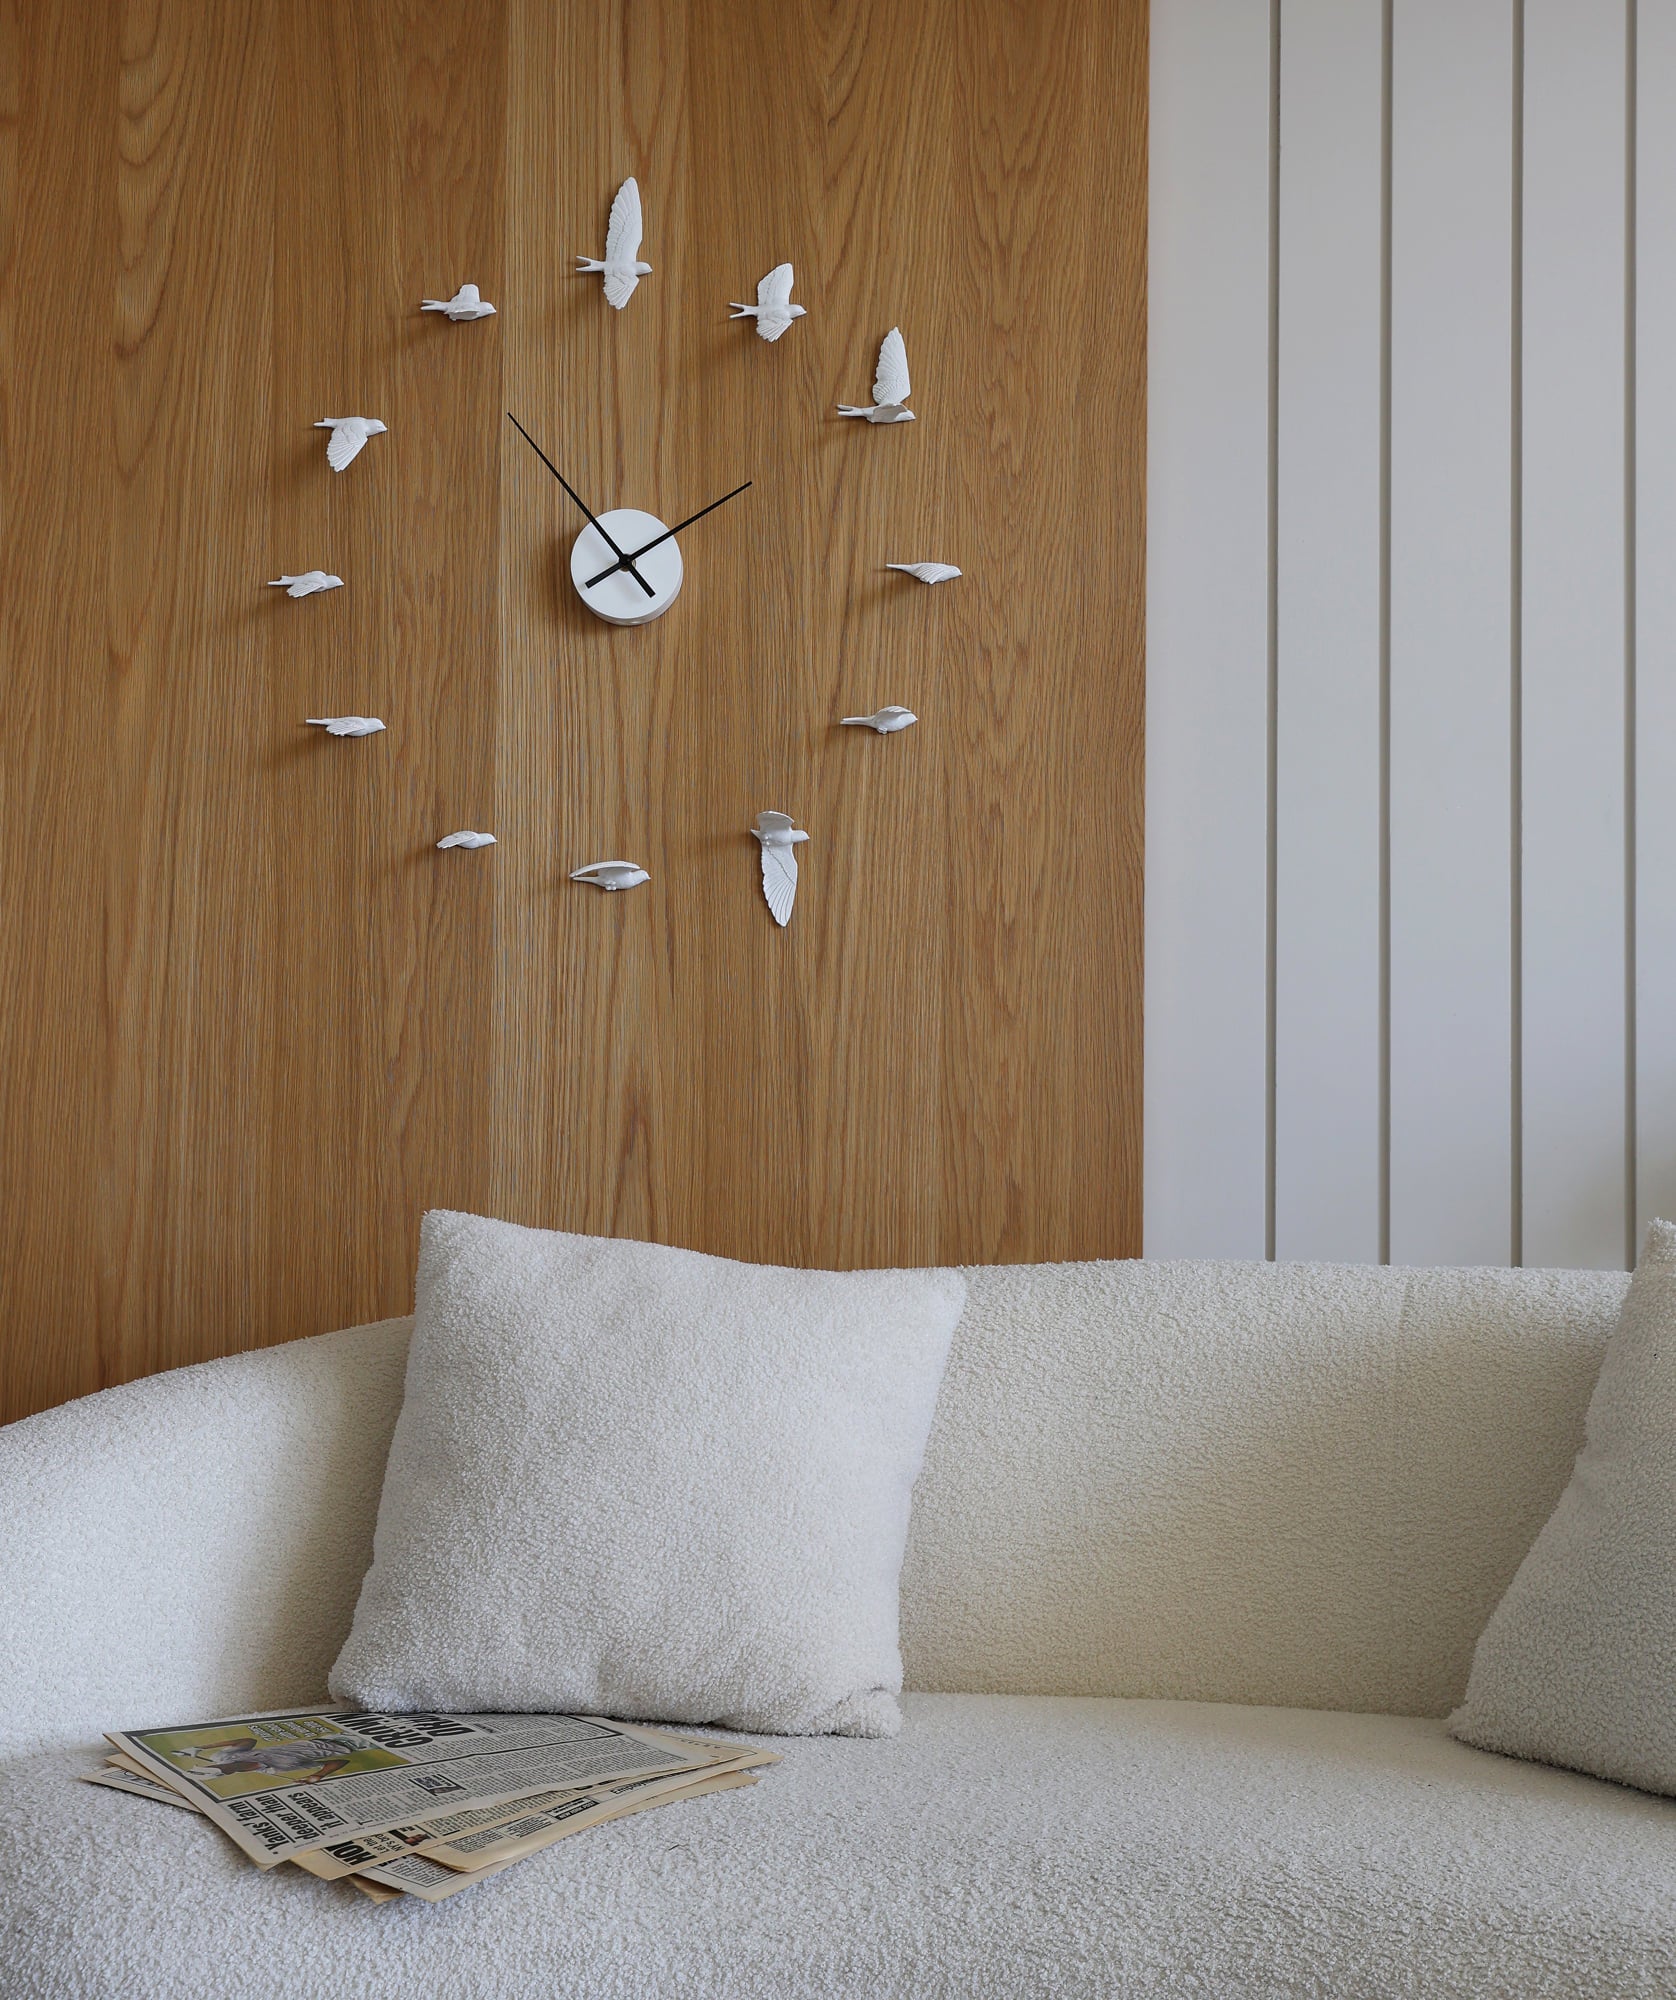 Swallow Clock: Time waits for no one, flying like a bird